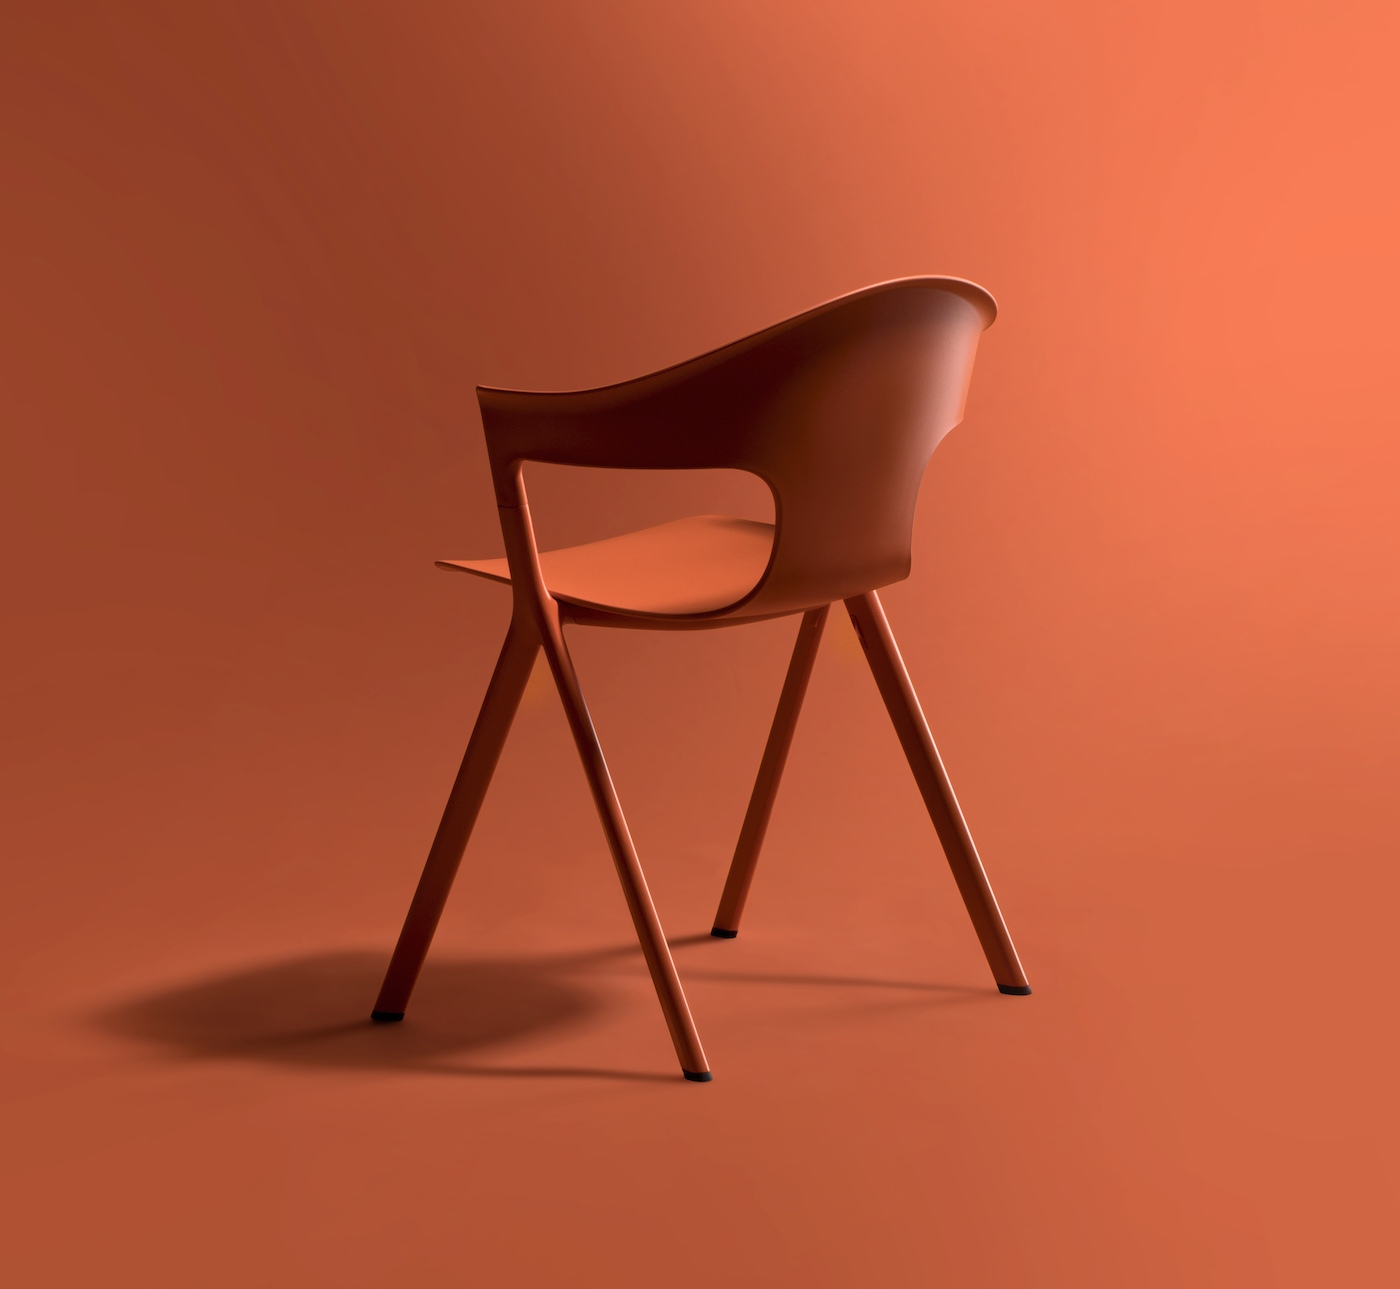 AXYL chair designed by Layer Design in Effect Magazine